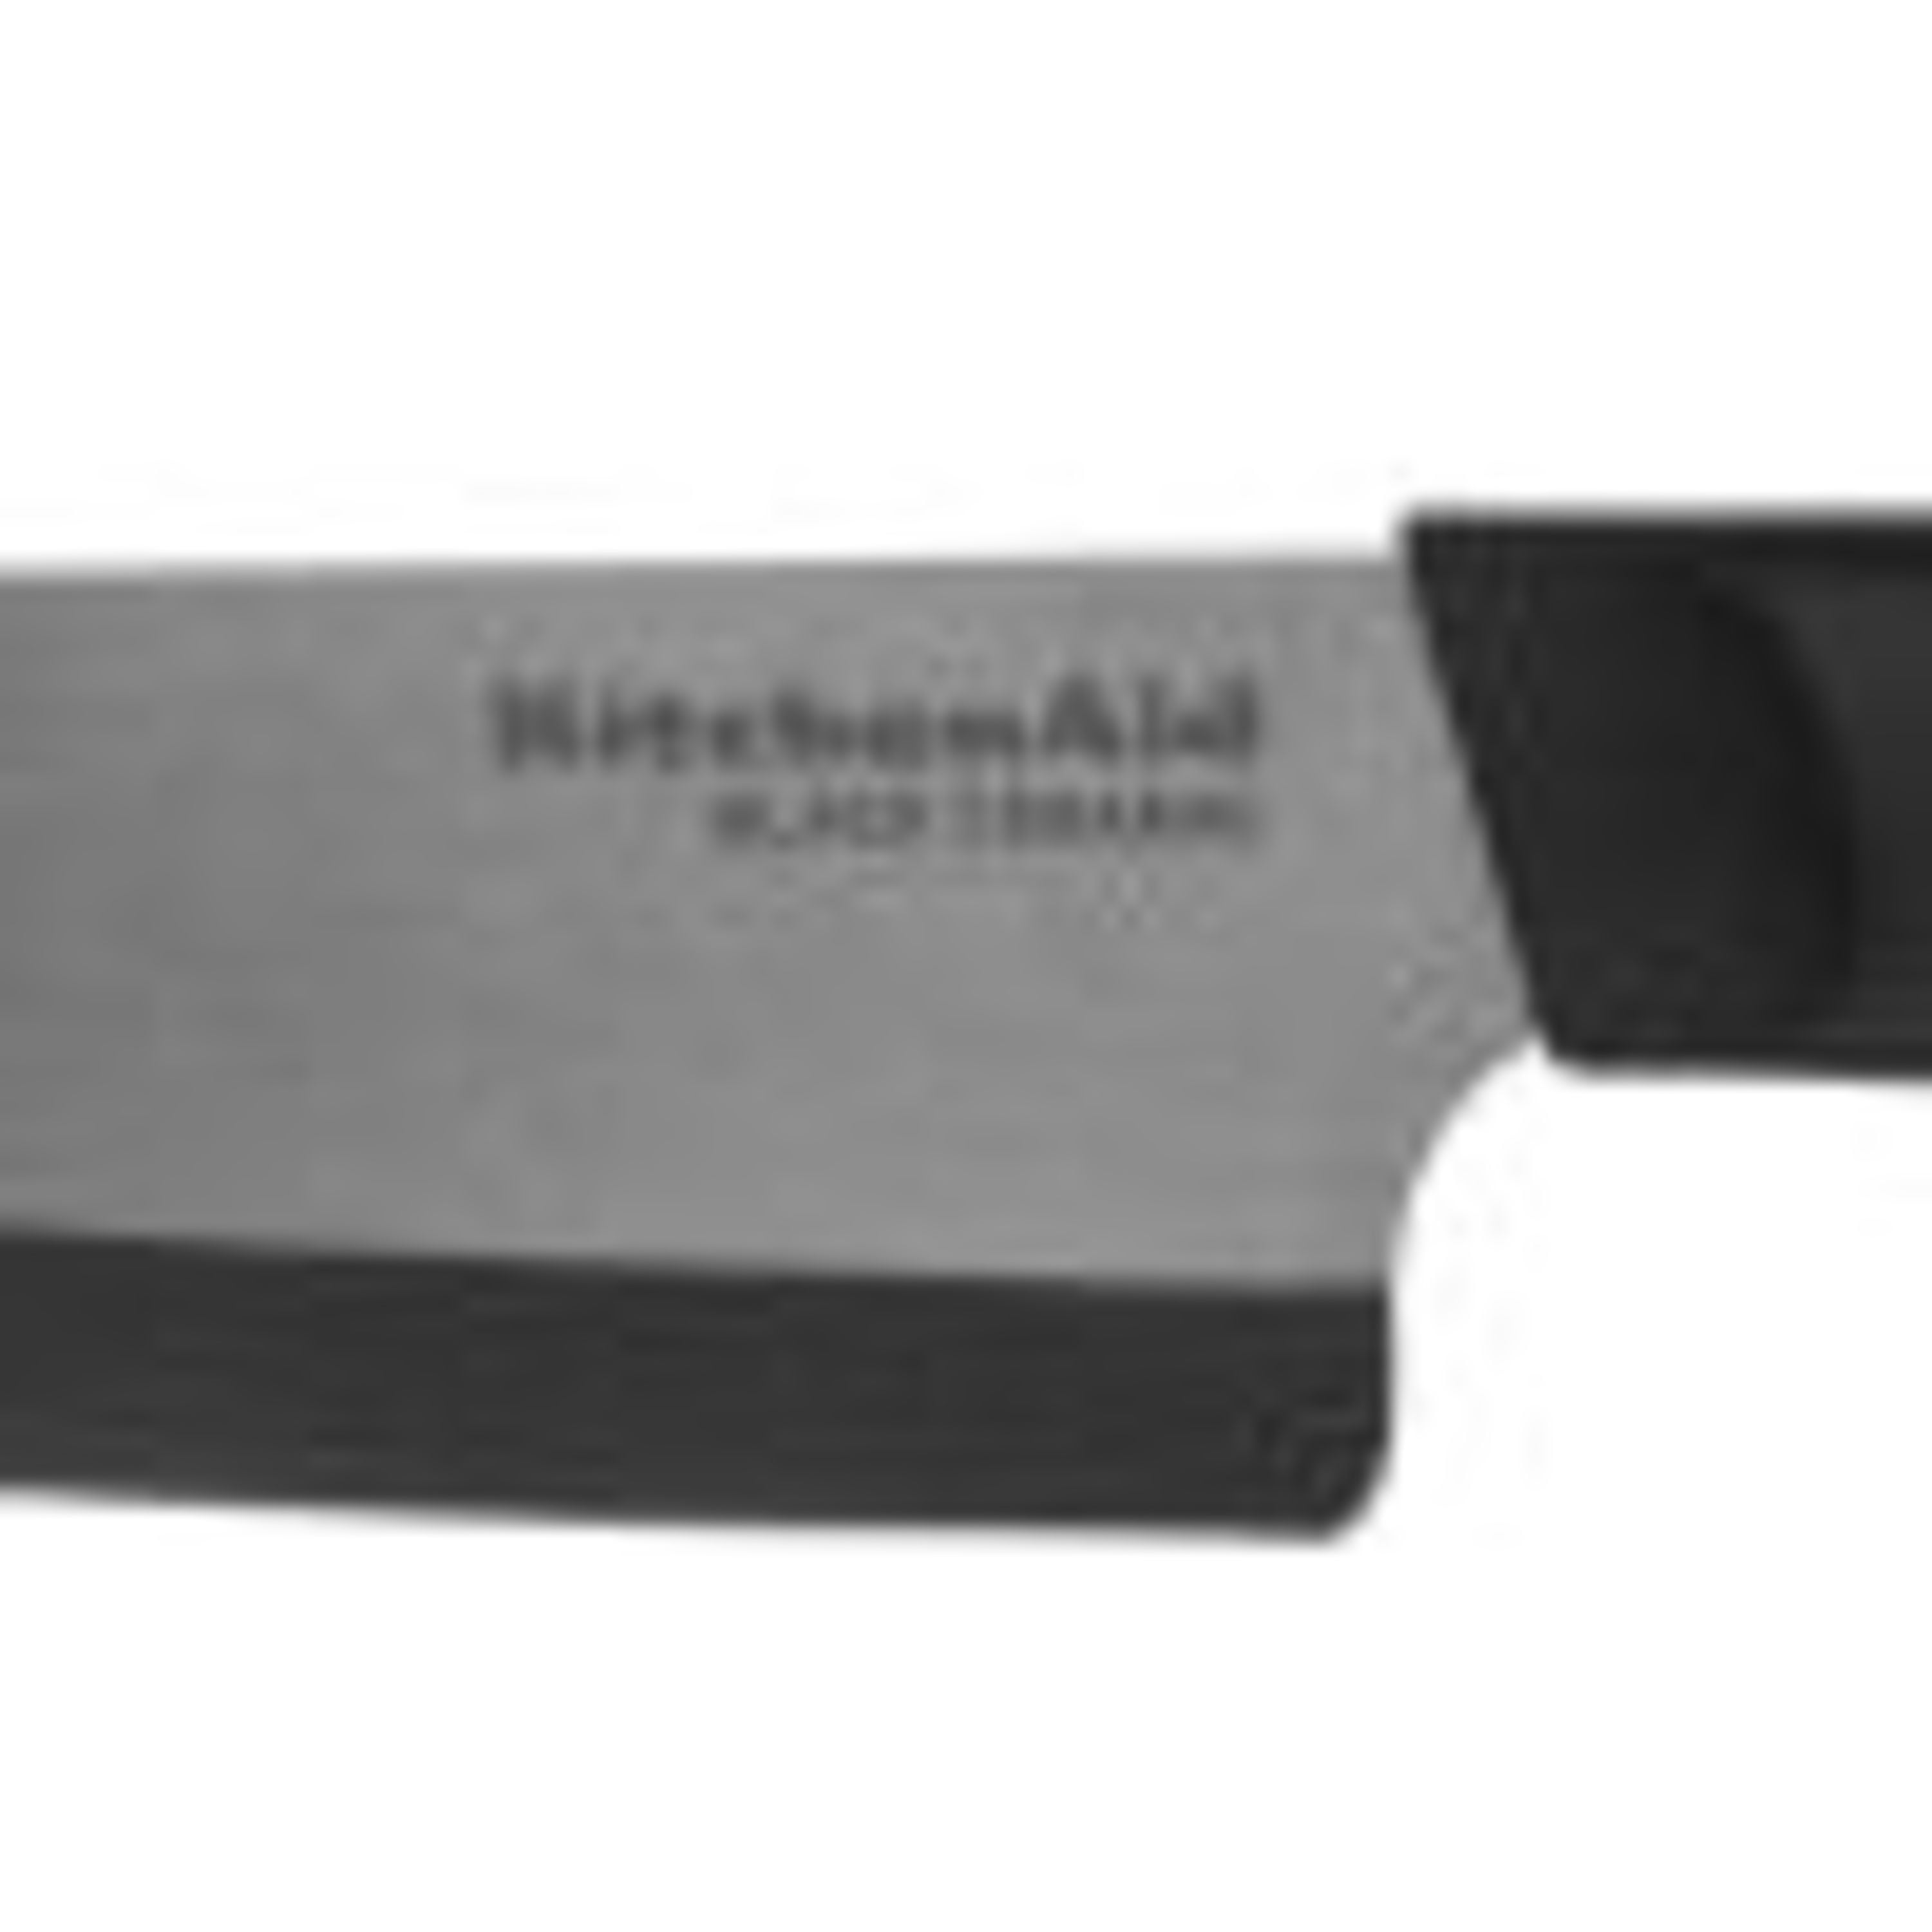 Kitchenaid Classic Ceramic Chef Knife with Blade Cover, 8-inch